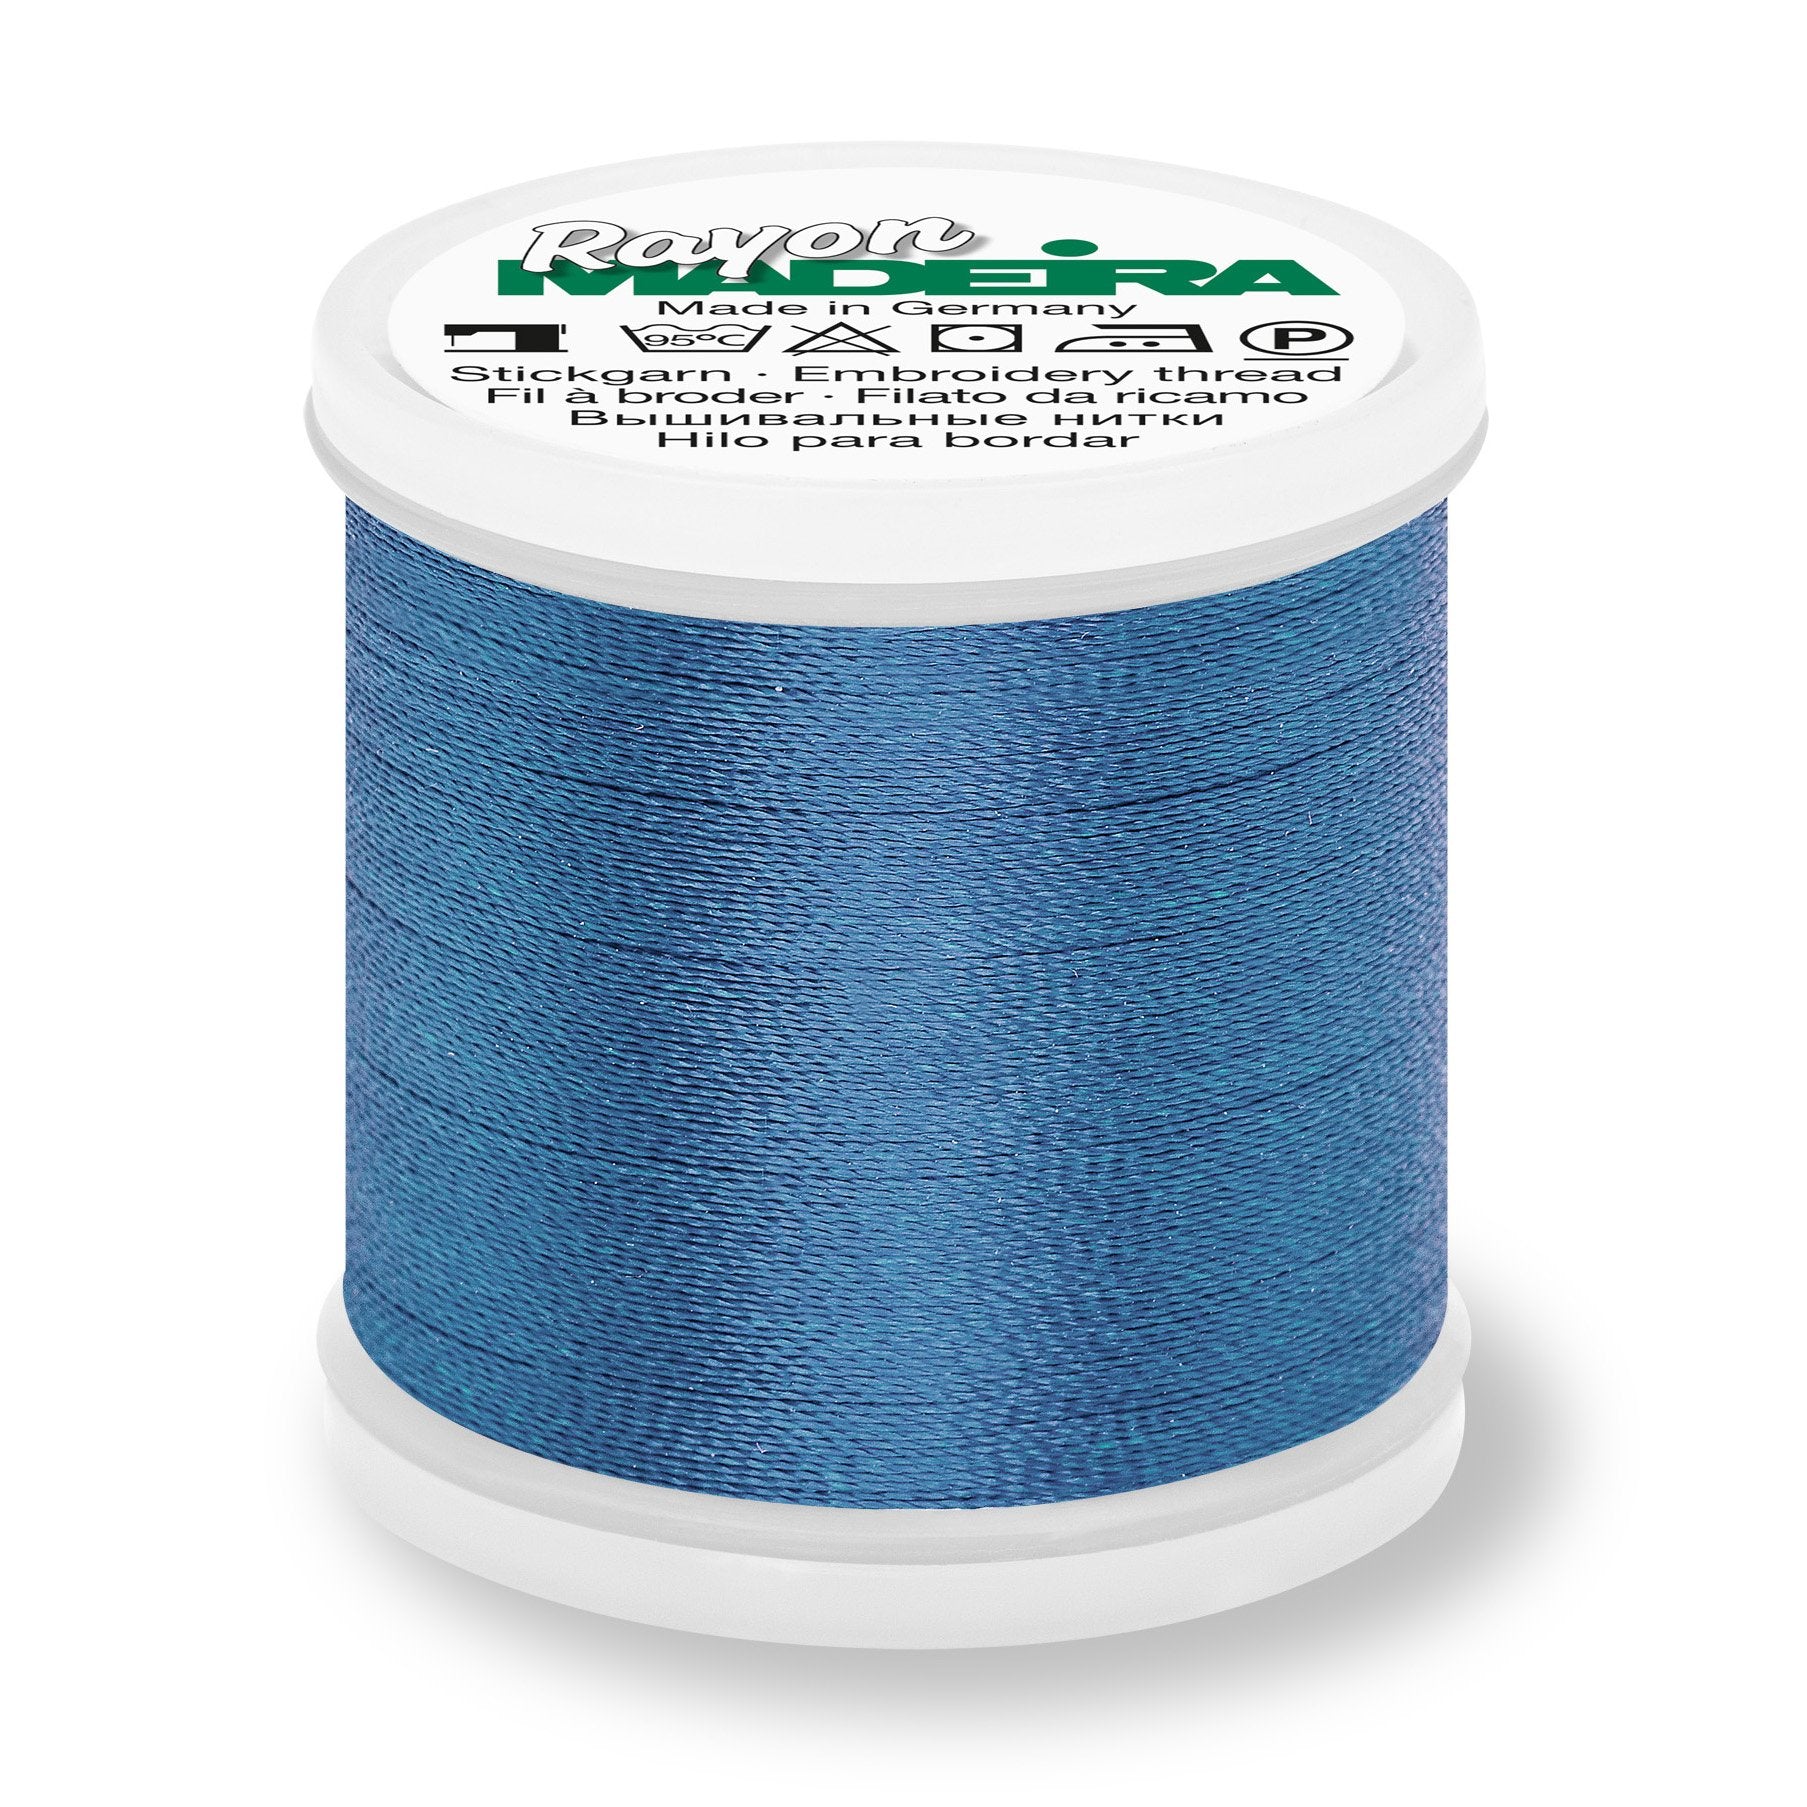 Madeira Rayon 40 Embroidery Thread 200m #1177 Mid Blue from Jaycotts Sewing Supplies